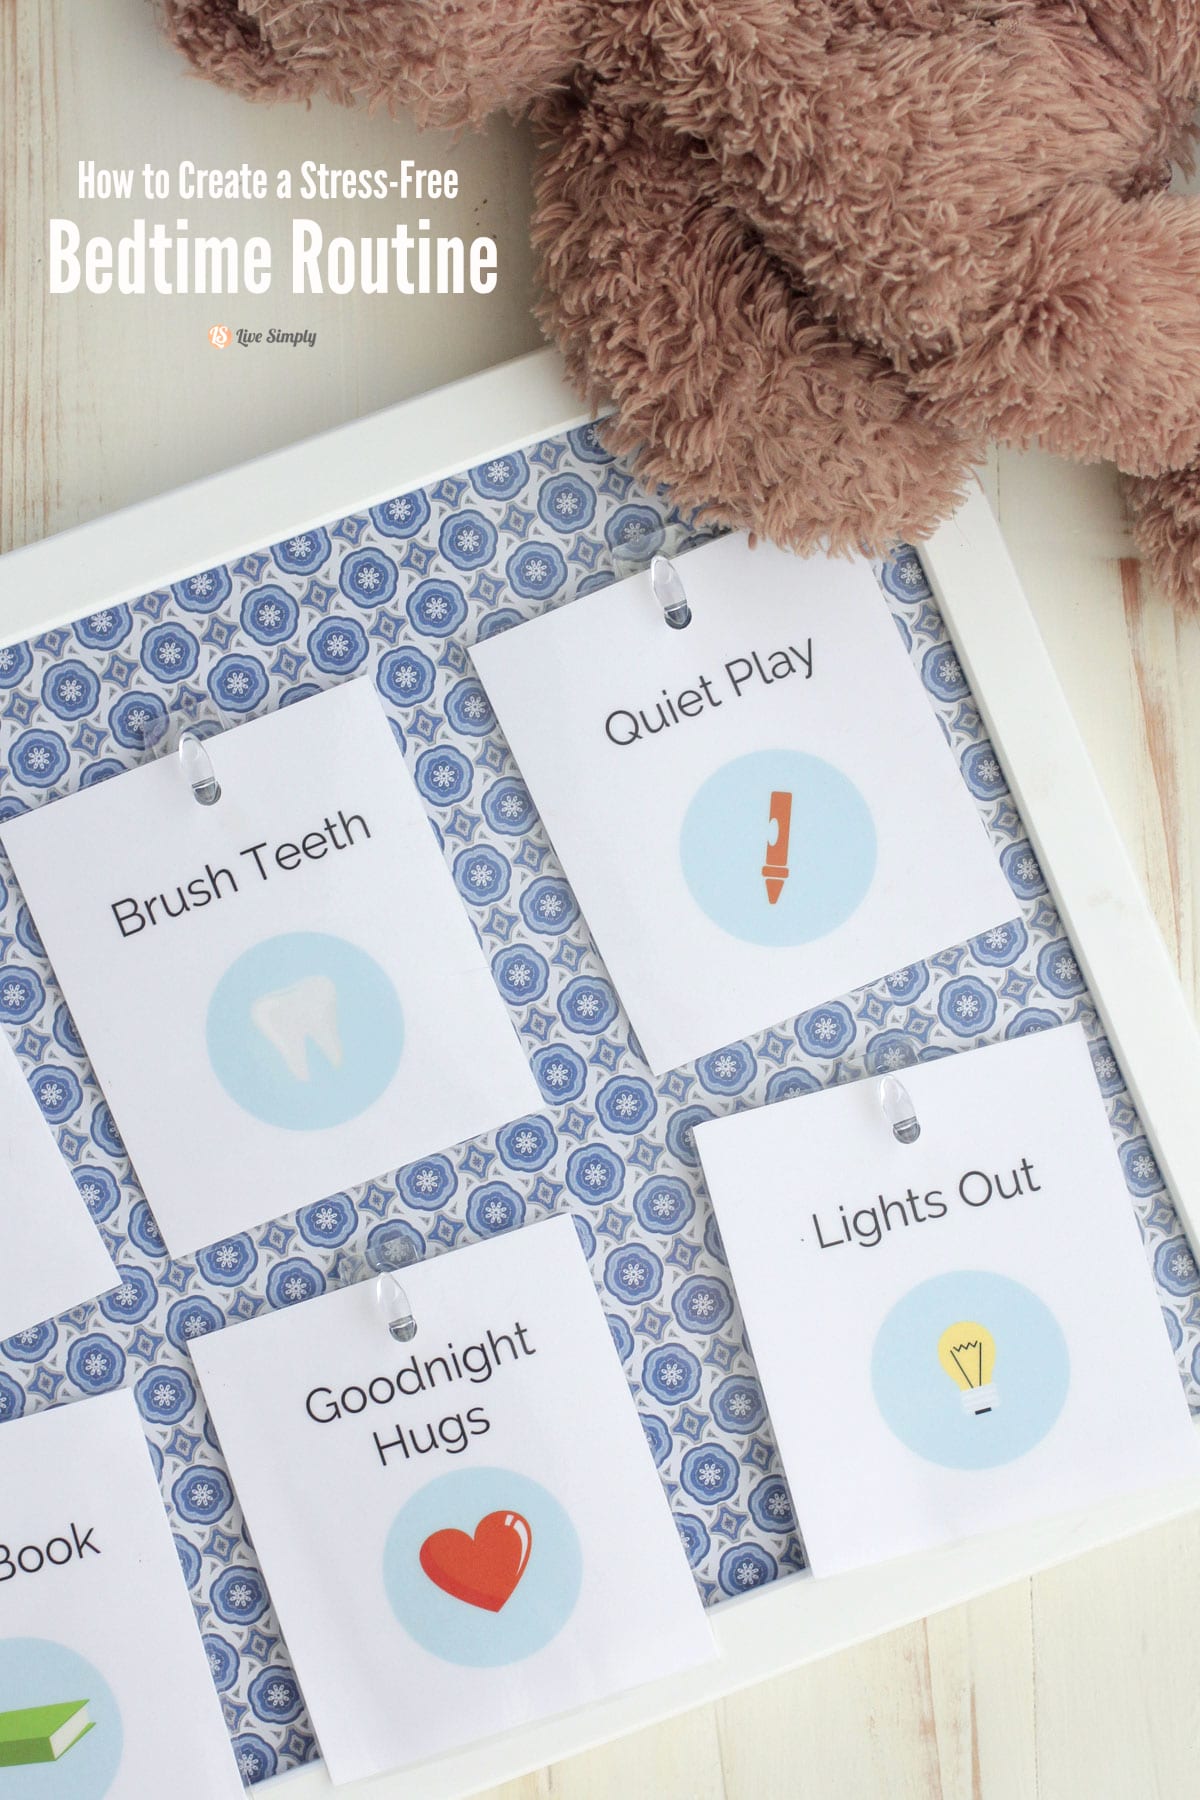 How to Create a Stress-Free Bedtime Routine + Printable